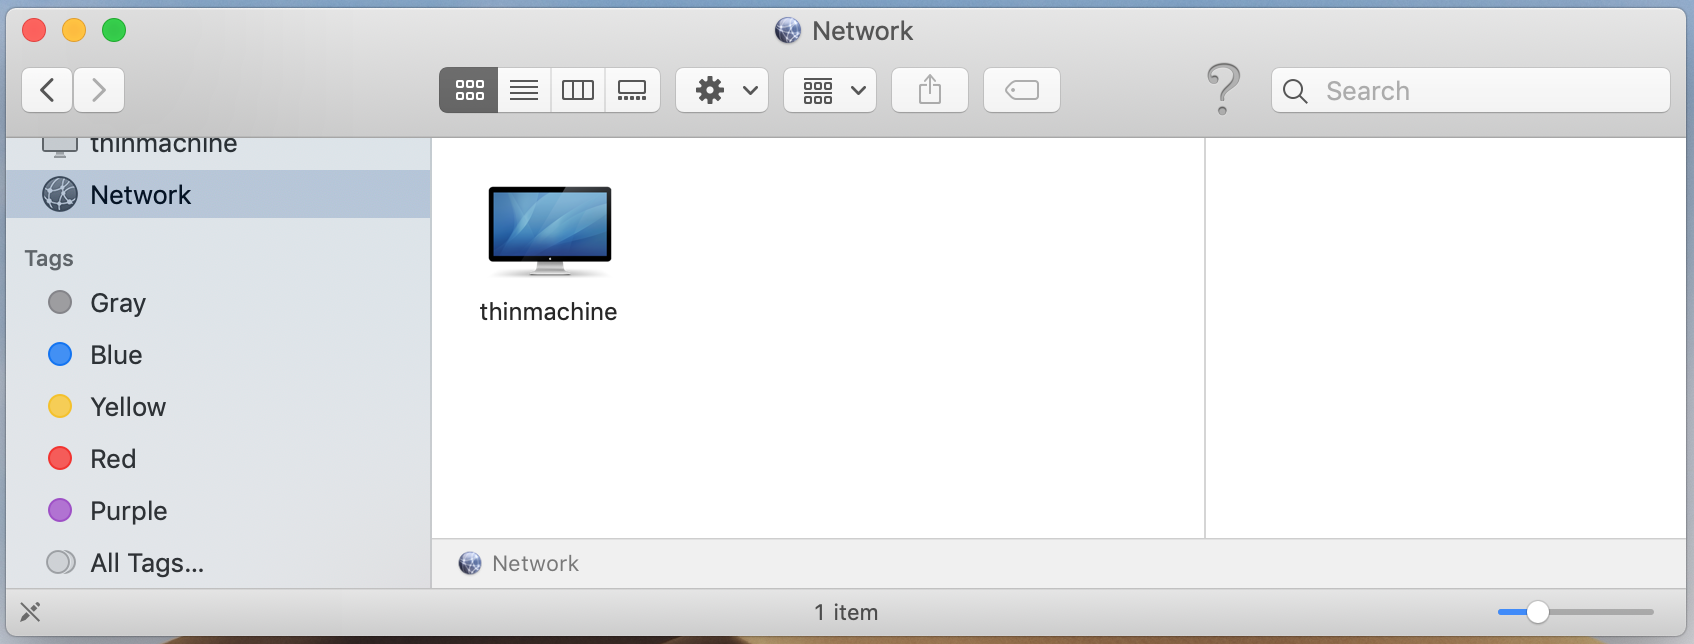 thinmachine seen in the Apple network